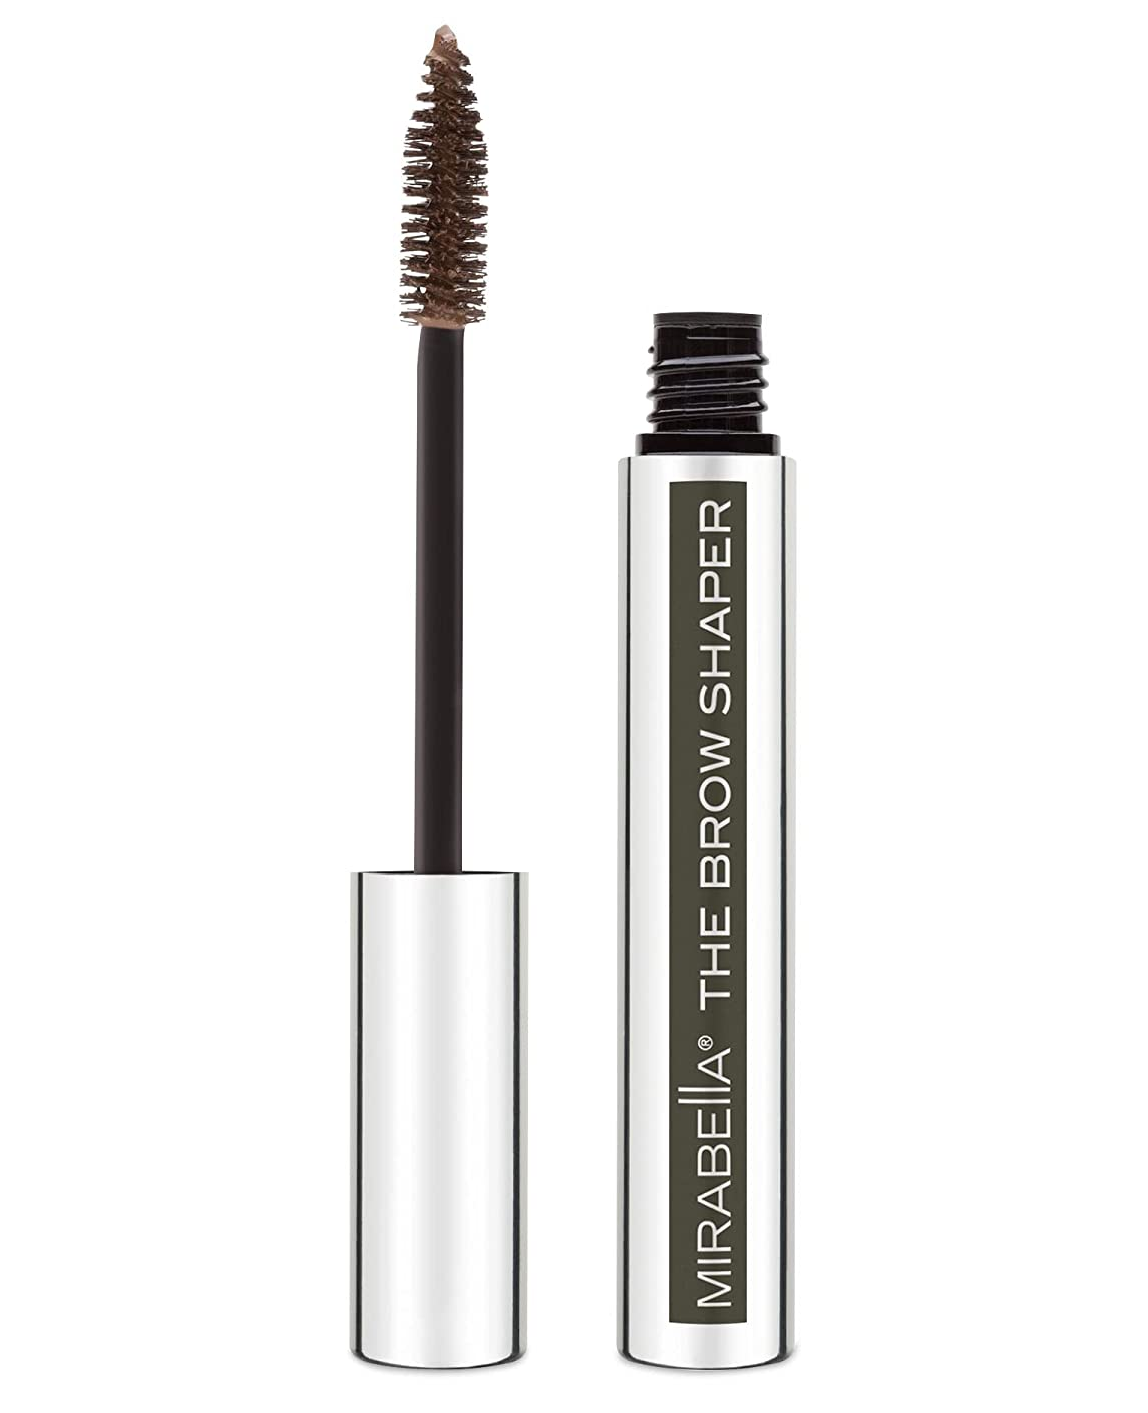 Mirabella The Brow Shaper All-In-One Long-Lasting Eyebrow Gel - $20.00